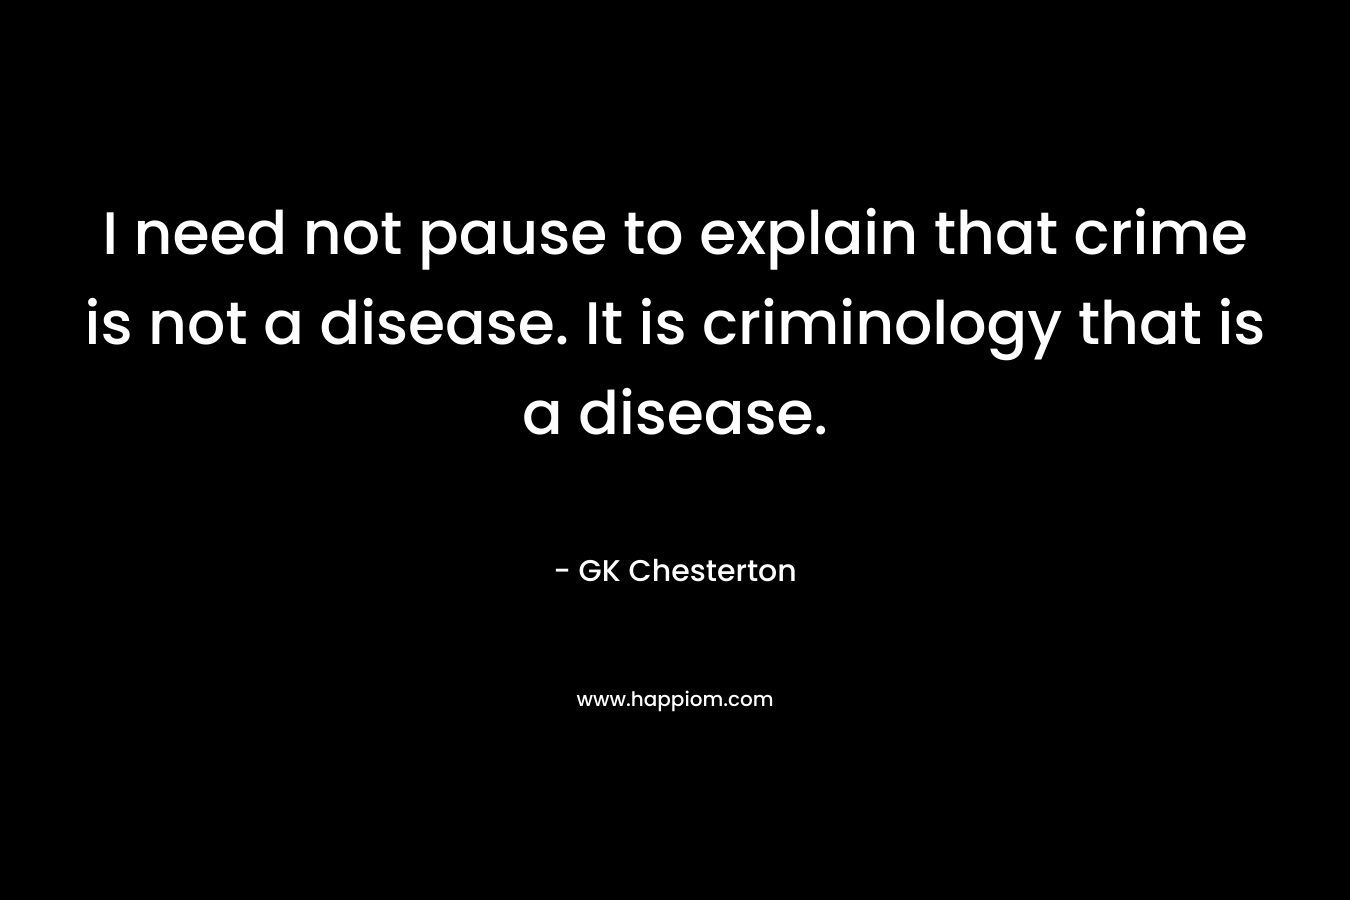 I need not pause to explain that crime is not a disease. It is criminology that is a disease. – GK Chesterton